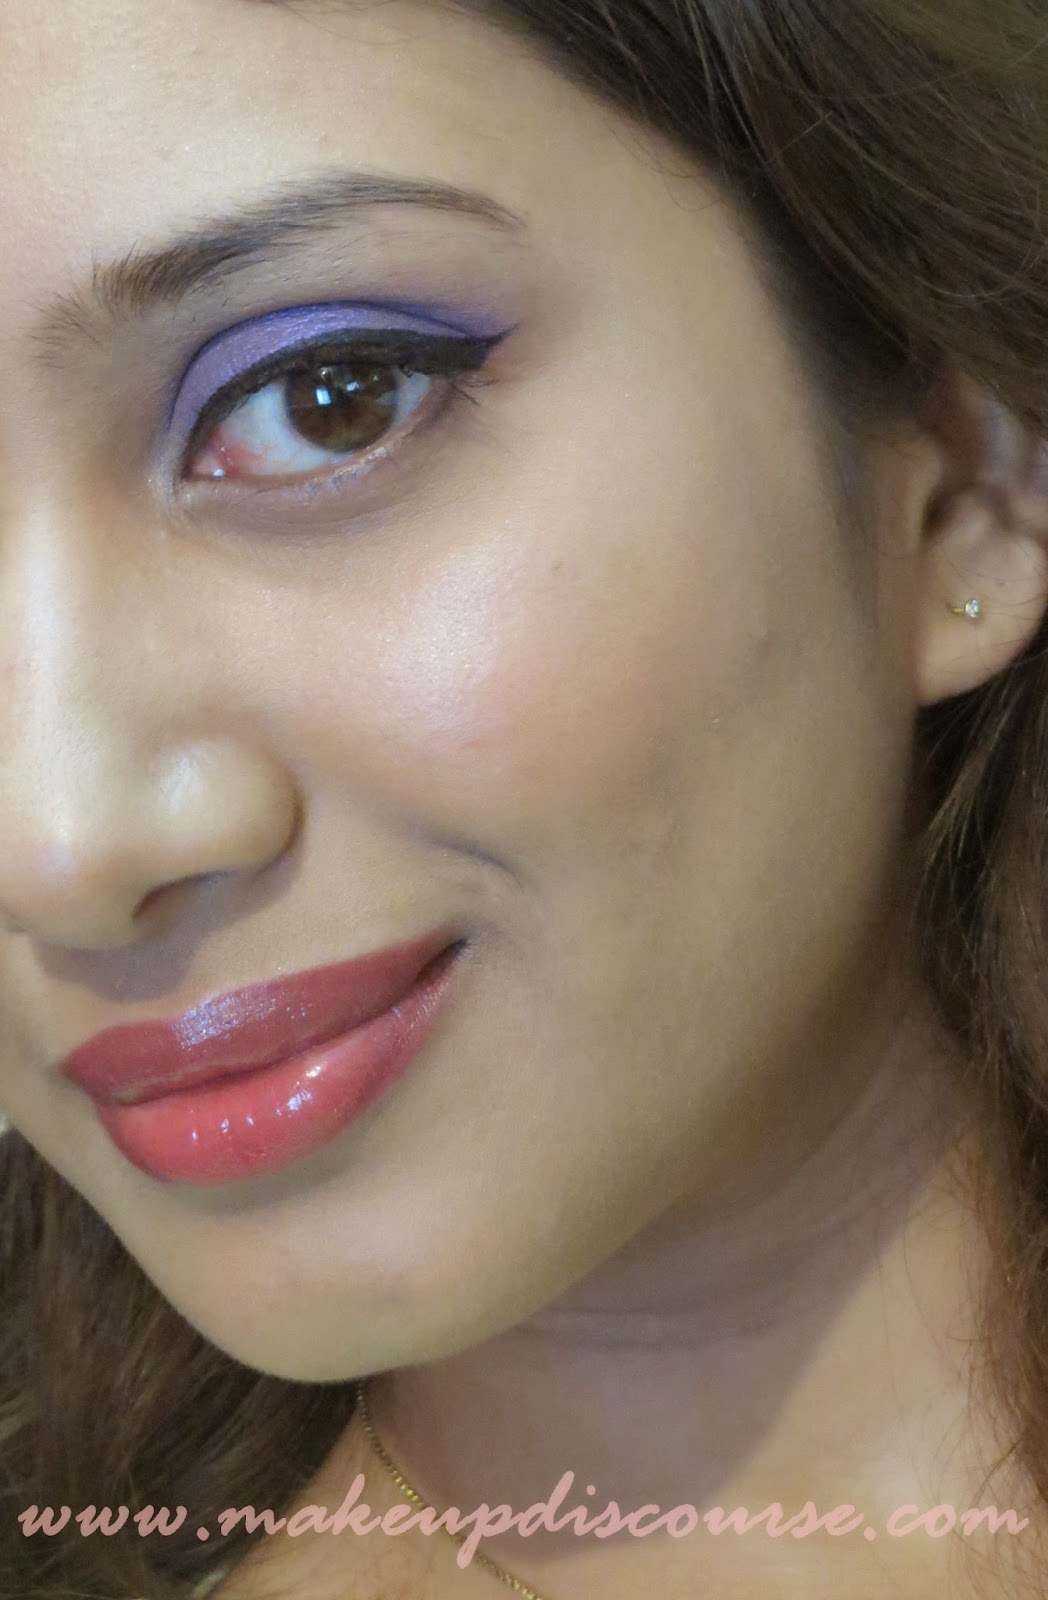 How to do Spring inspired eyemakeup with Bright Orange Lips and Purple Eyemakeup